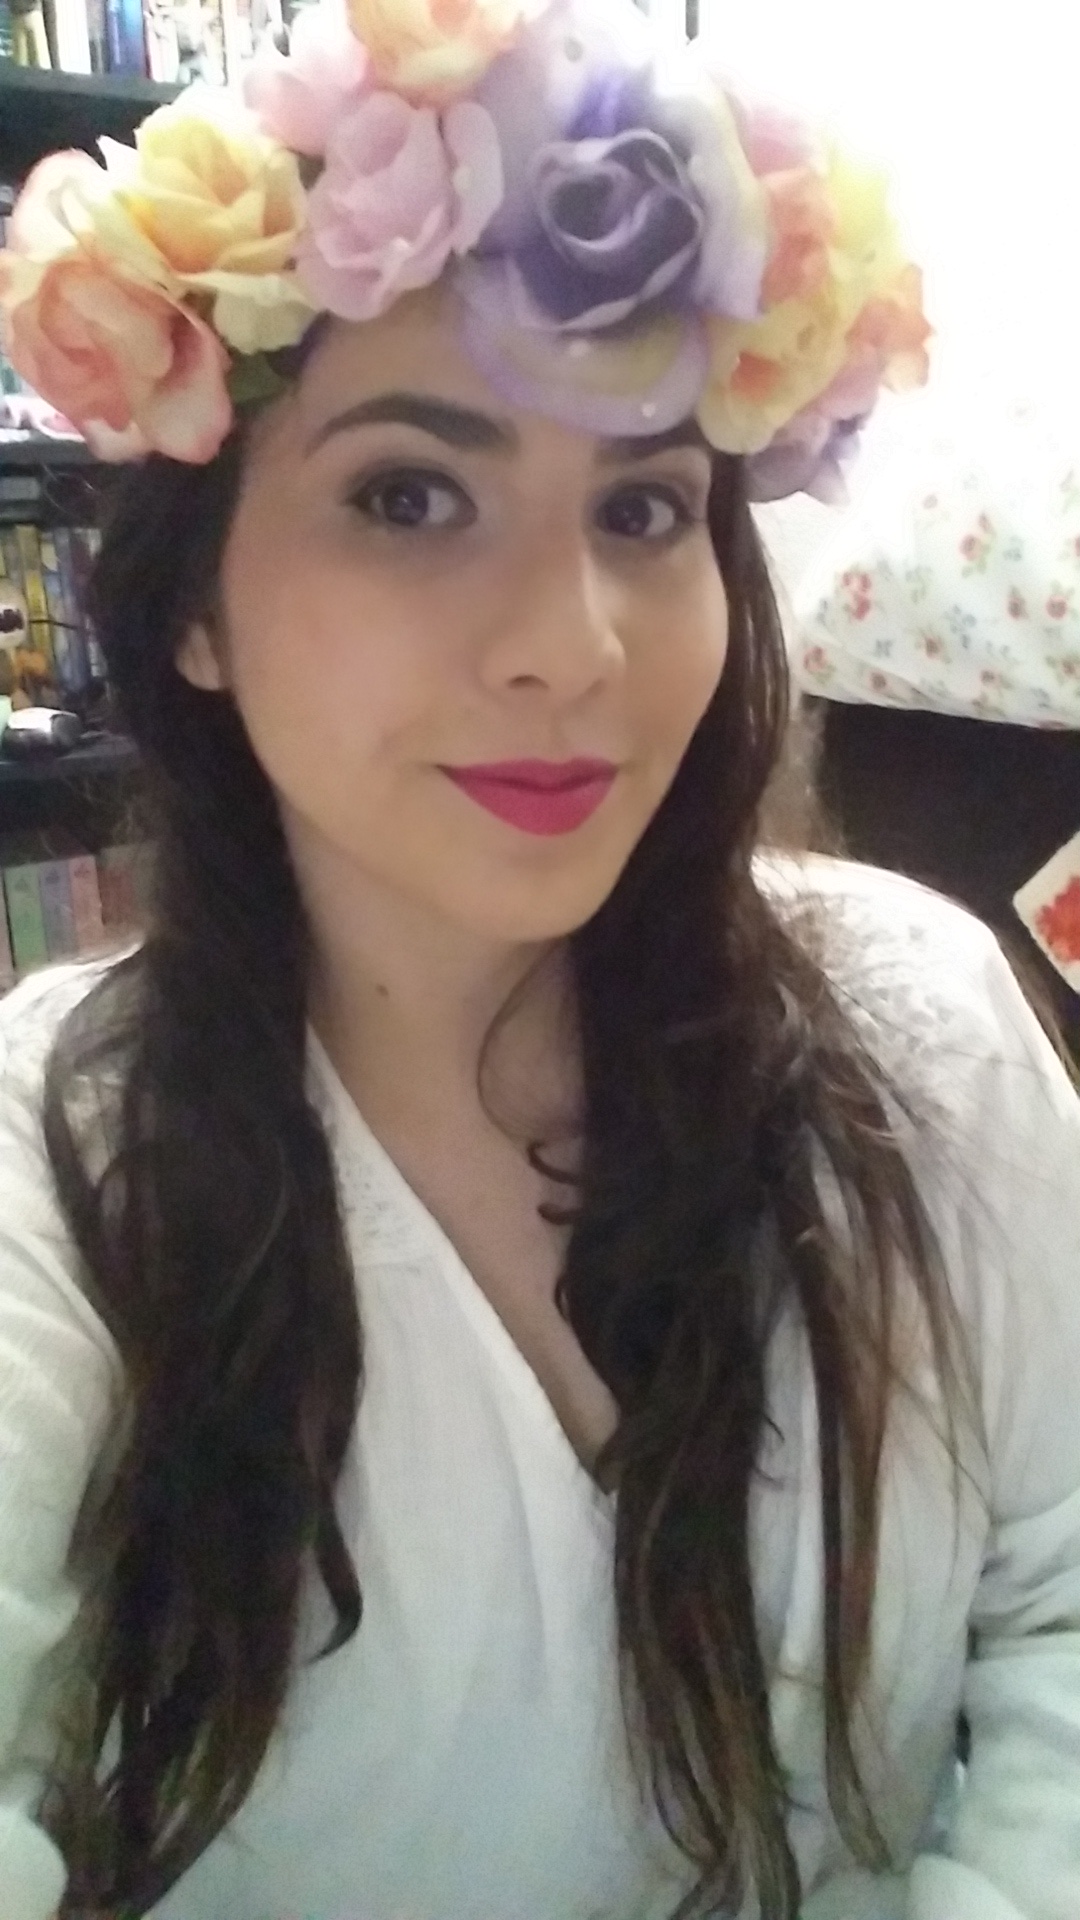 Me looking super age appropriate whilst rocking my awesome handmade flower crown. I made that with my hands. I know, it's pretty cool. 